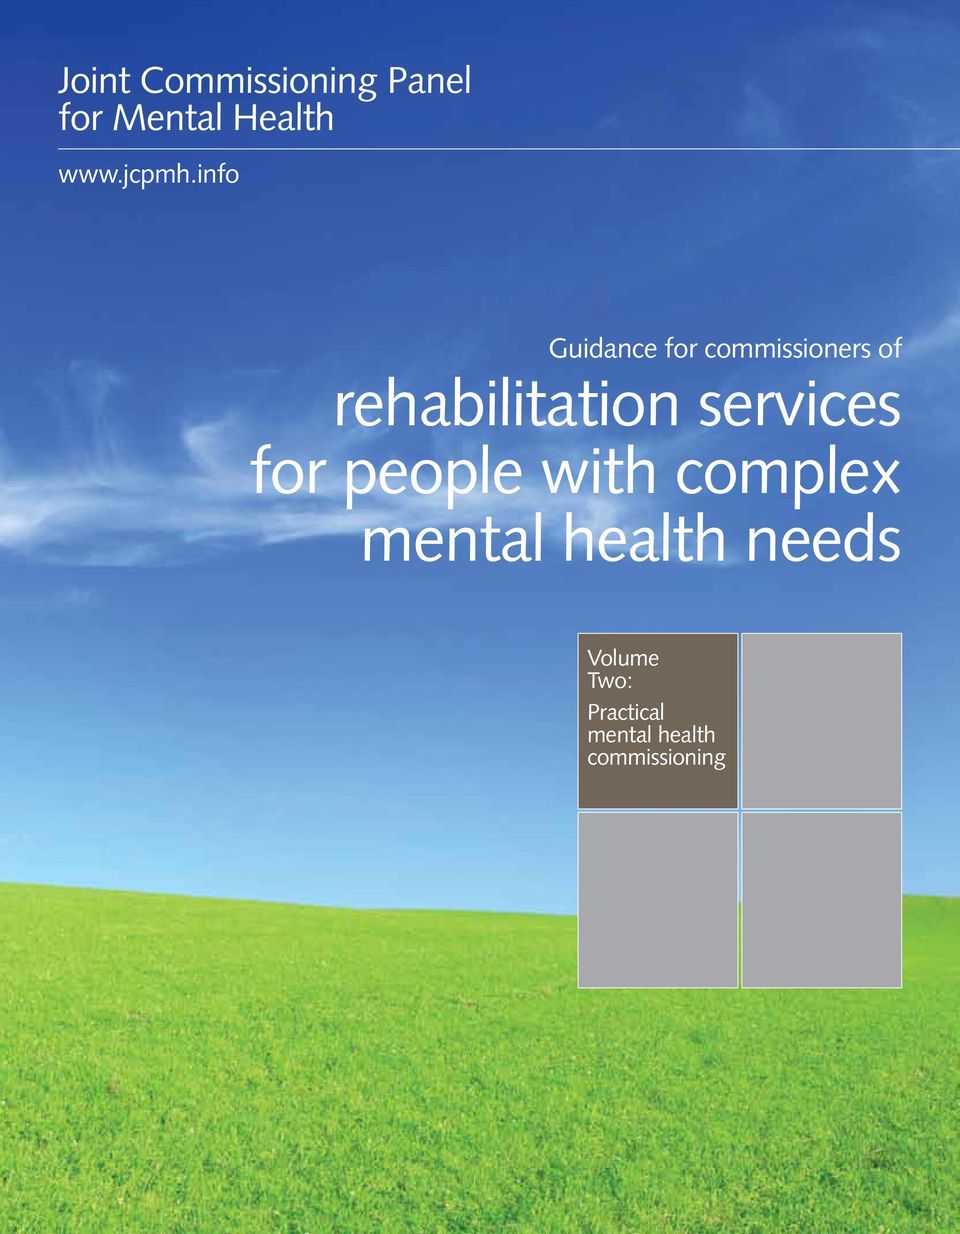 complex mental health needs 1 Guidance for commissioners of rehabilitation